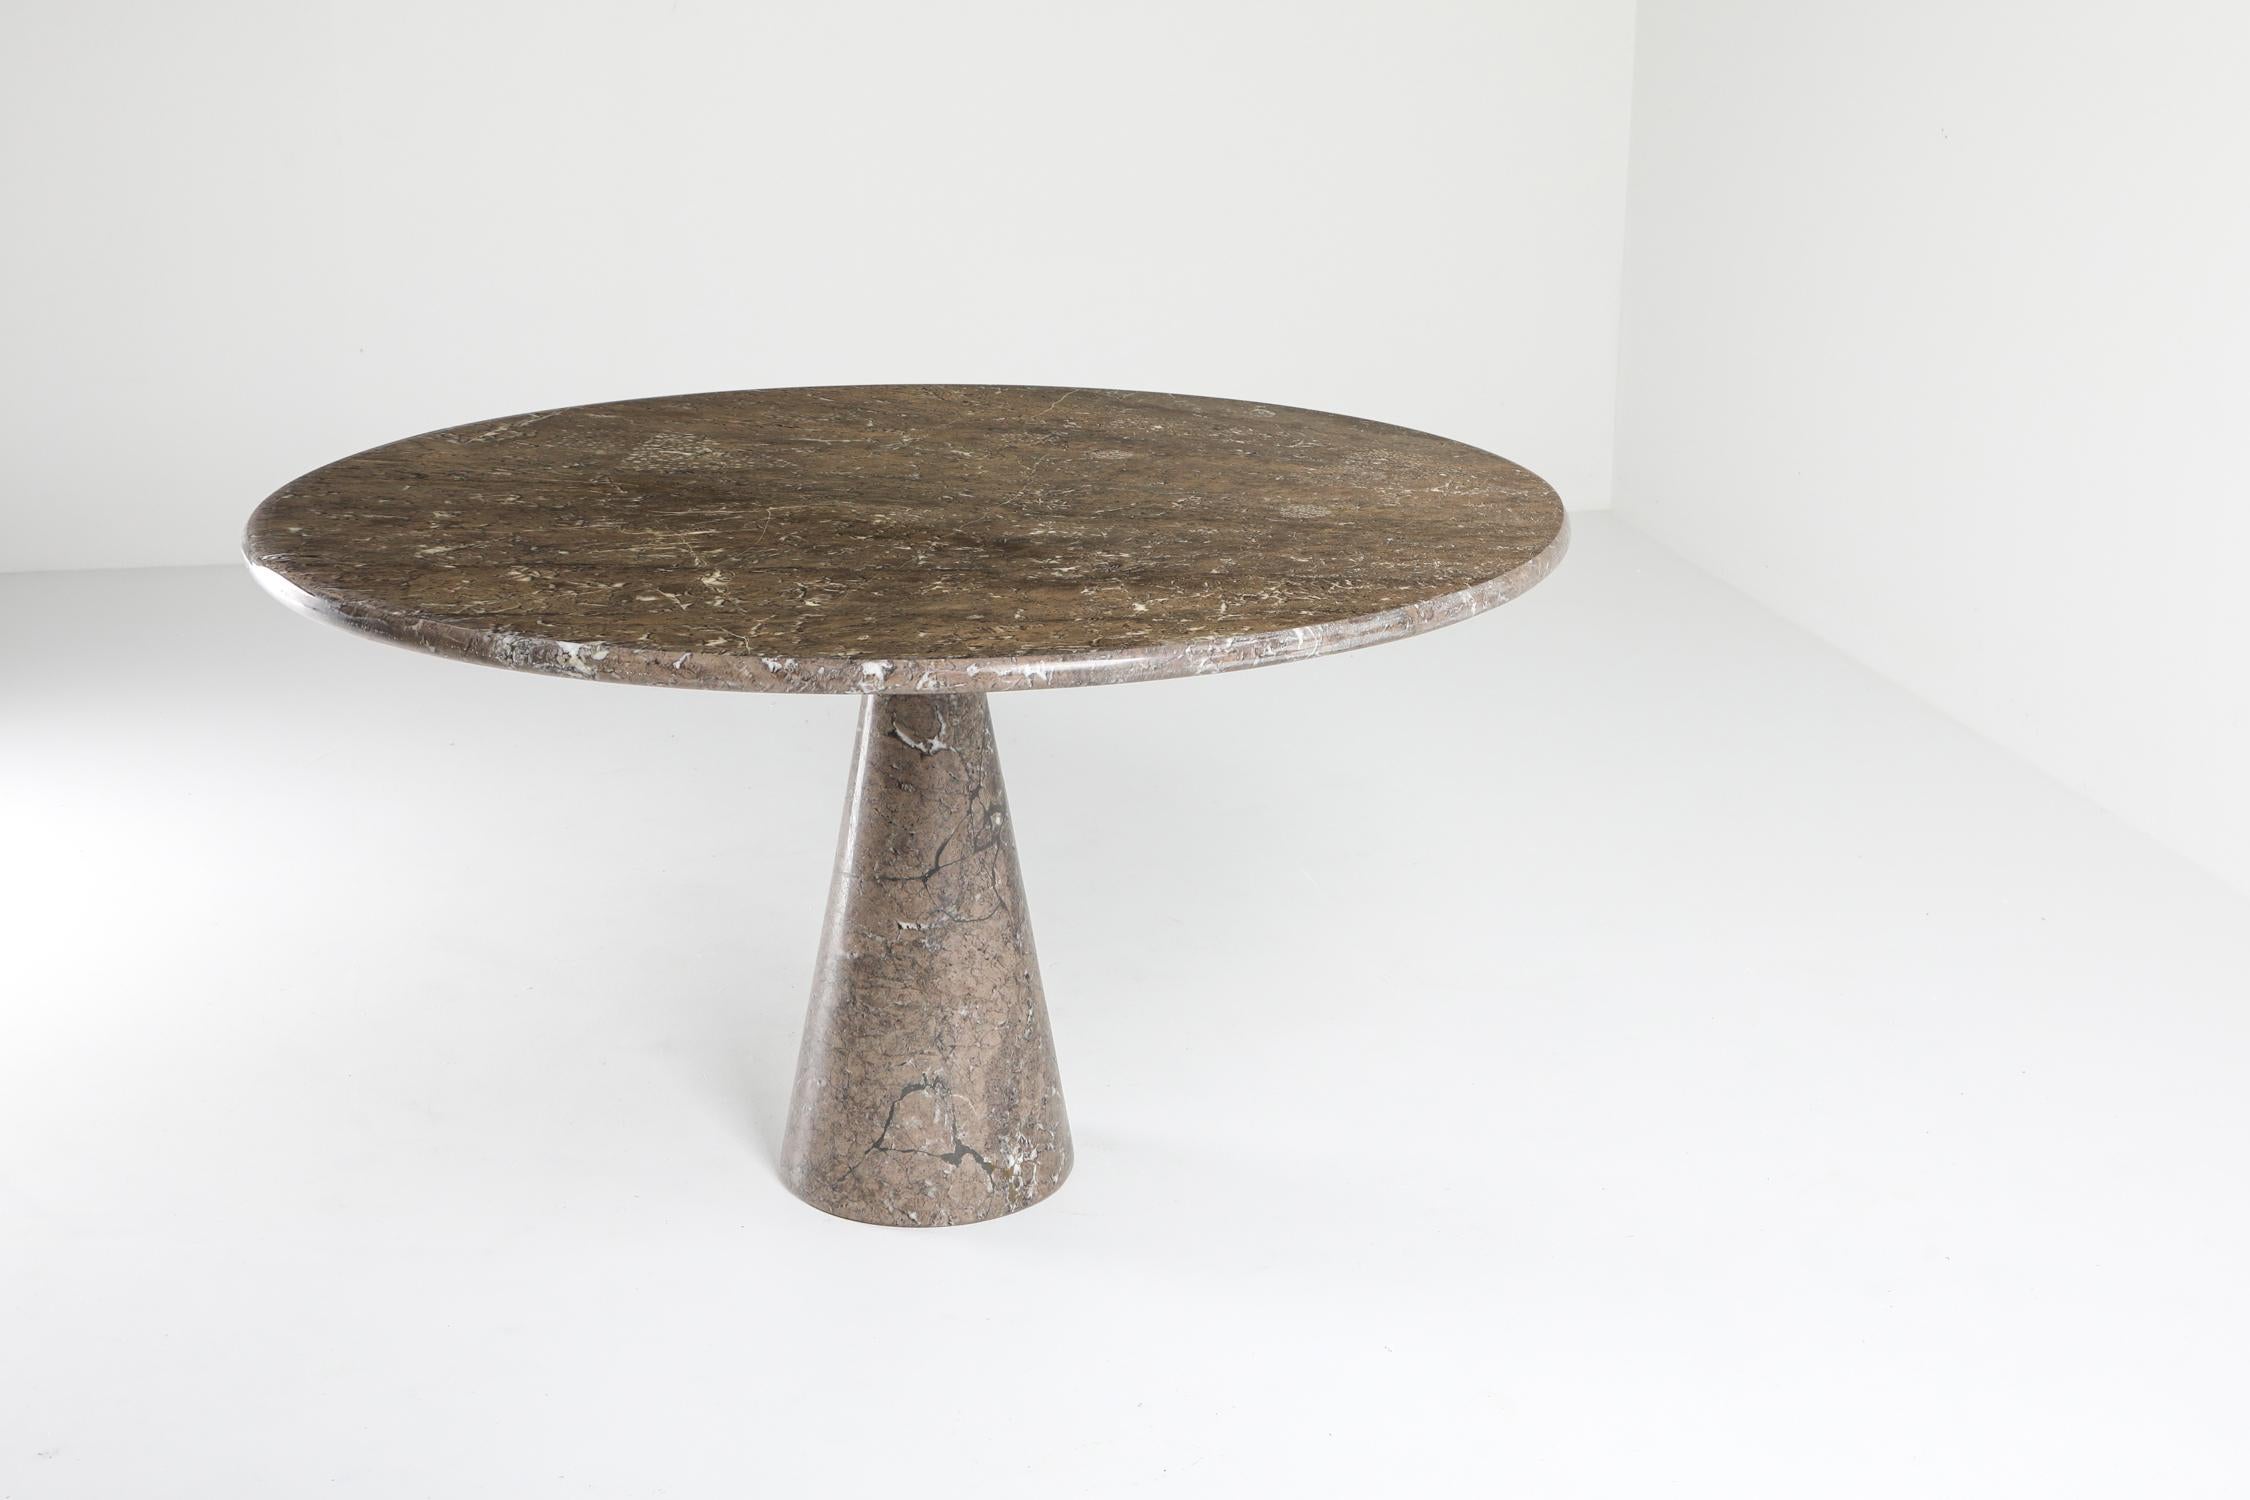 Eros Postmodern round dining table by Angelo Mangiarotti in mondragone marble, Skipper, Italy, 1970s.

A stunning 'Eros' table designed by Angelo Mangiarotti in 1971 and produced by Skipper. The solid marble table features an ingenious gravity